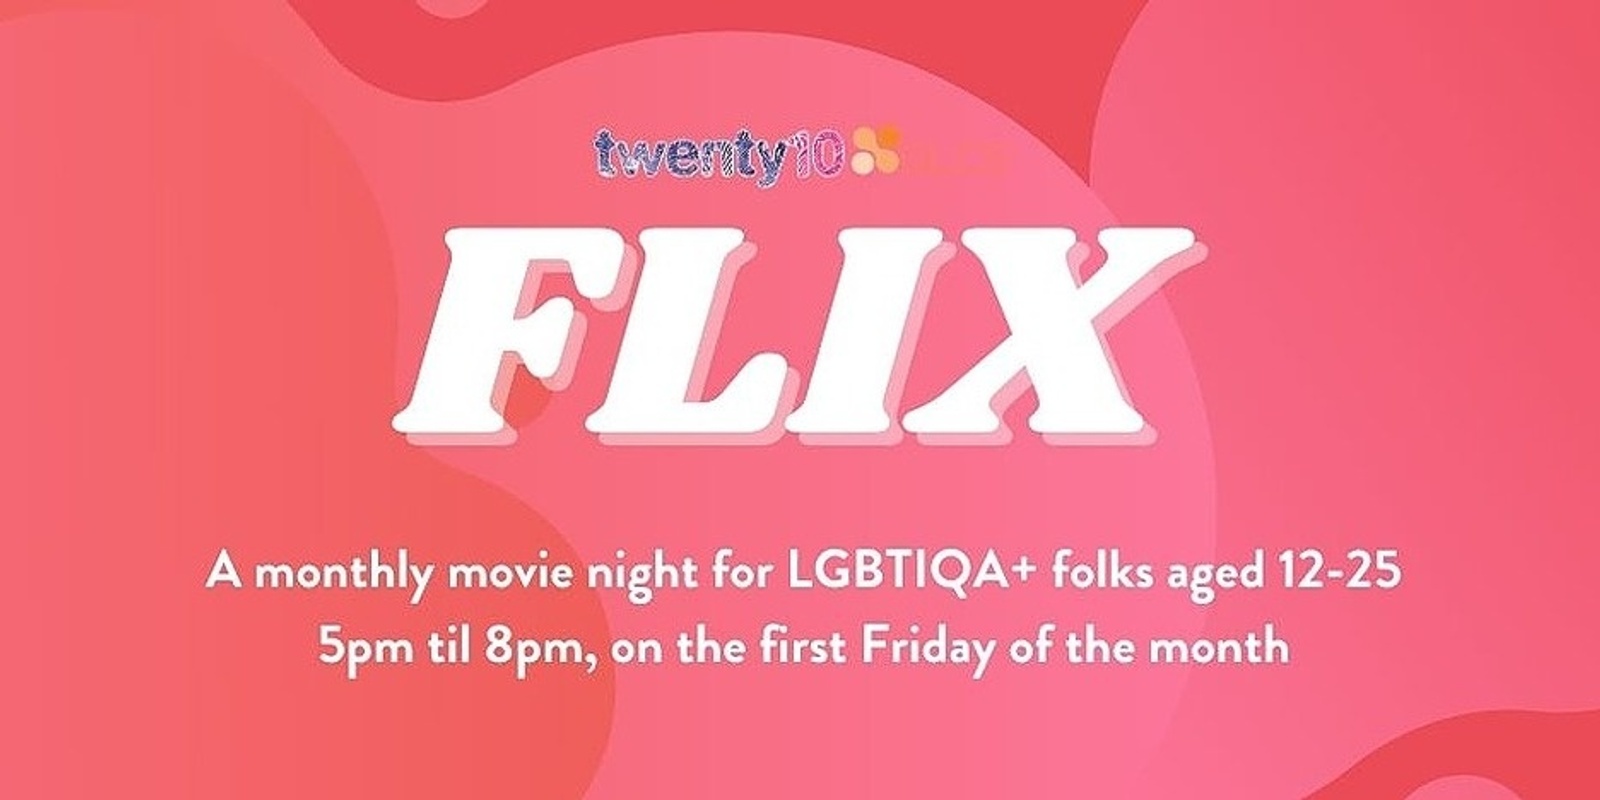 Banner image for FLIX (A monthly movie night for LGBTIQA+ folks aged 12-25)